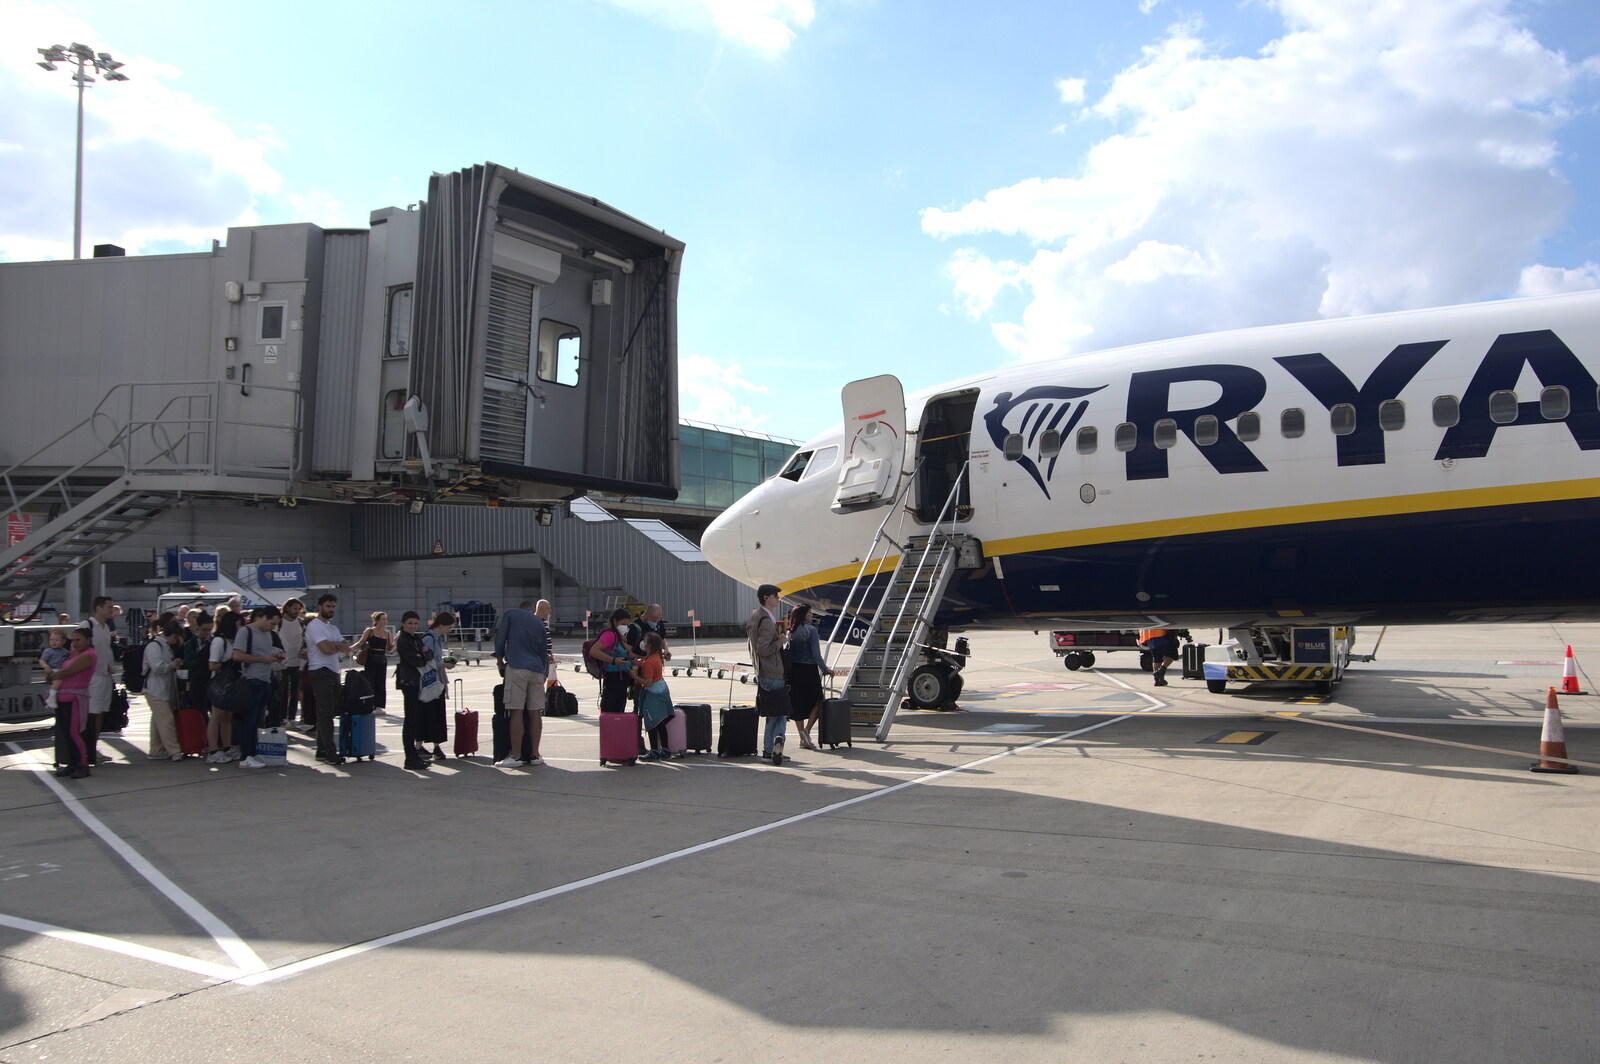 The Flags of Arezzo, Tuscany, Italy - 28th August 2022: Typical Ryanair - won't pay for the air bridge